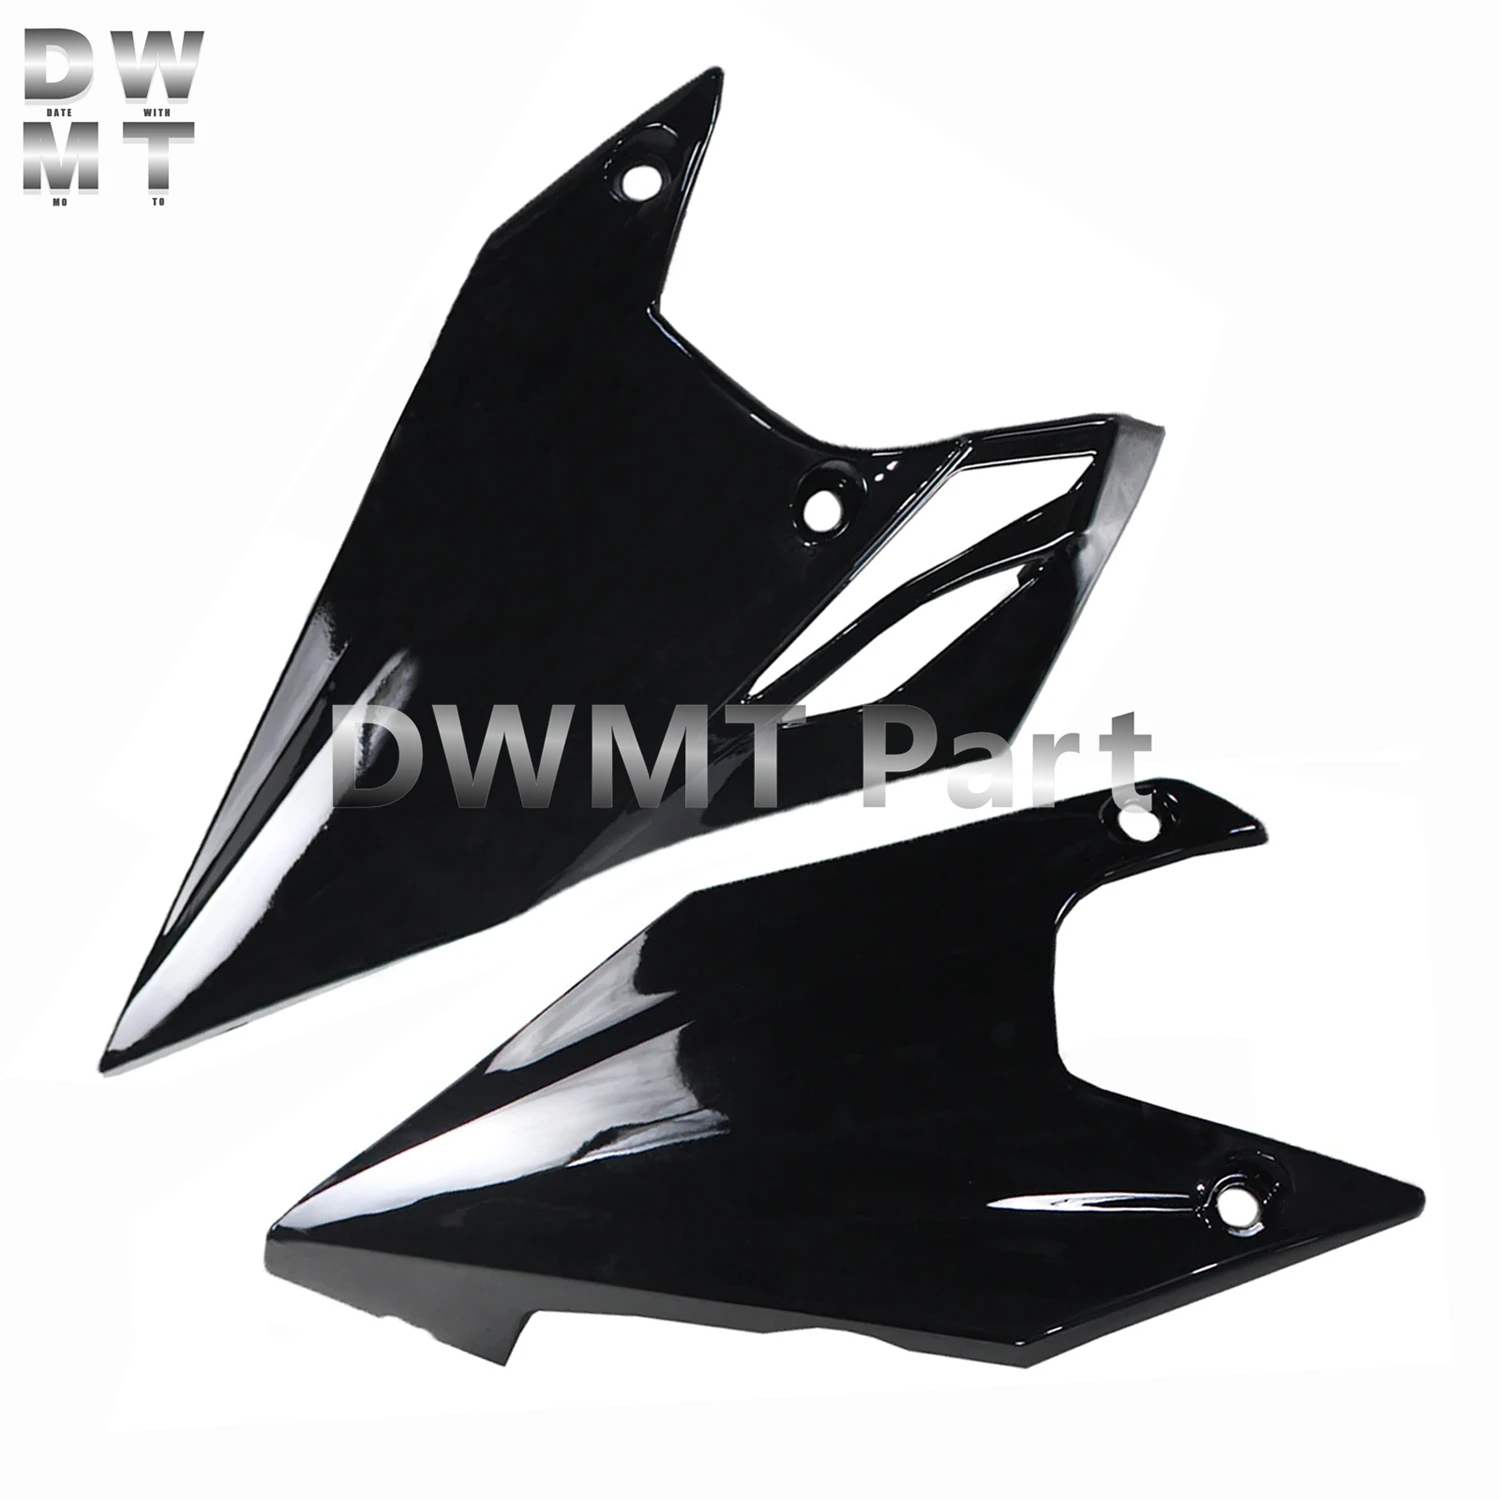 

For Kawasaki Z1000 2010 2011 2012 2013 Motorcycle Fairing Lower Engine Side Cover Panels Bottom Guard Belly Pan Cowl ABS Plastic